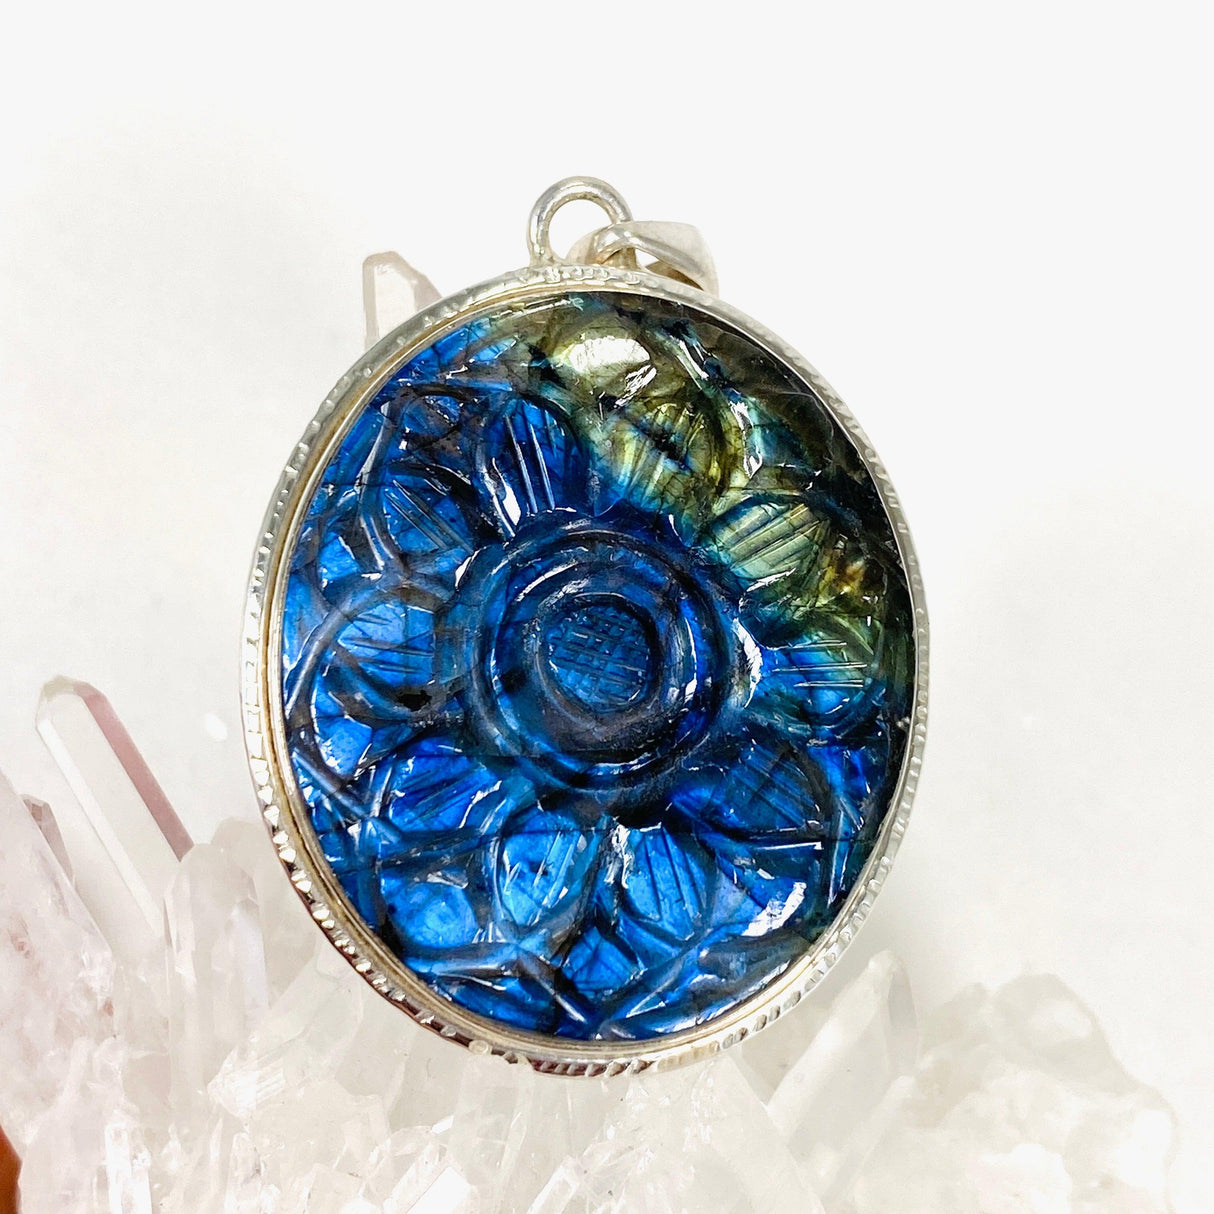 Oval shaped blue and gold flash labradorite flower carving pendant set in silver sitting on a clear quartz crystal